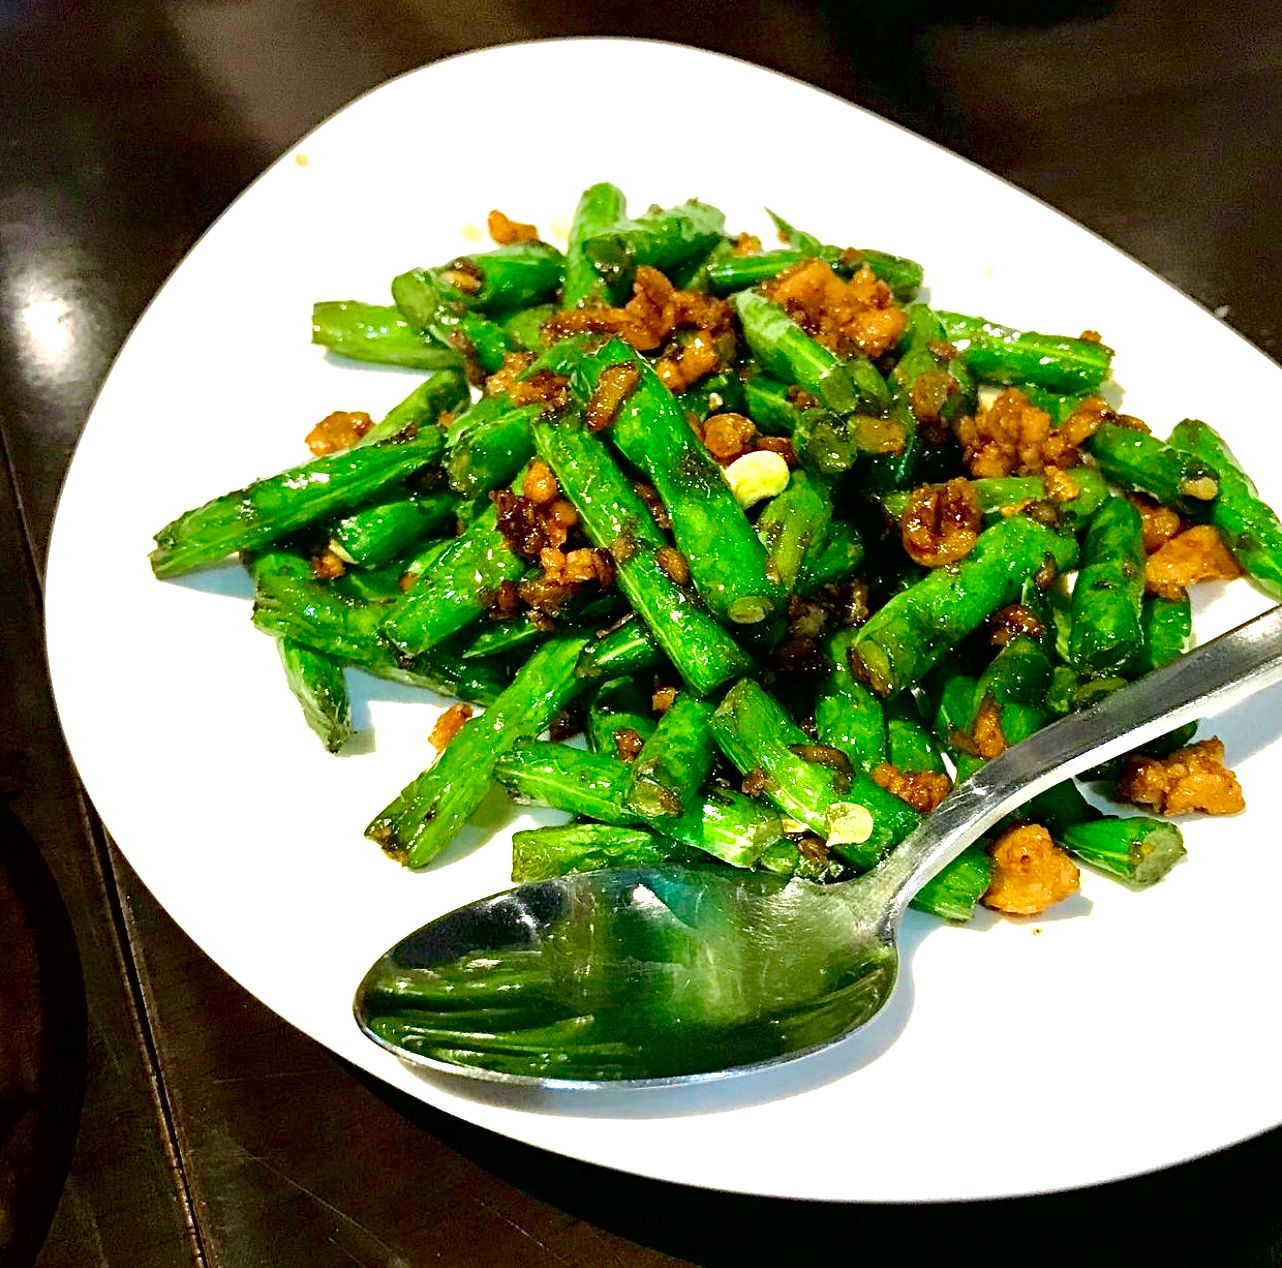 French Beans with Minced Meat & Dried Shrimps 乾煸四季豆 